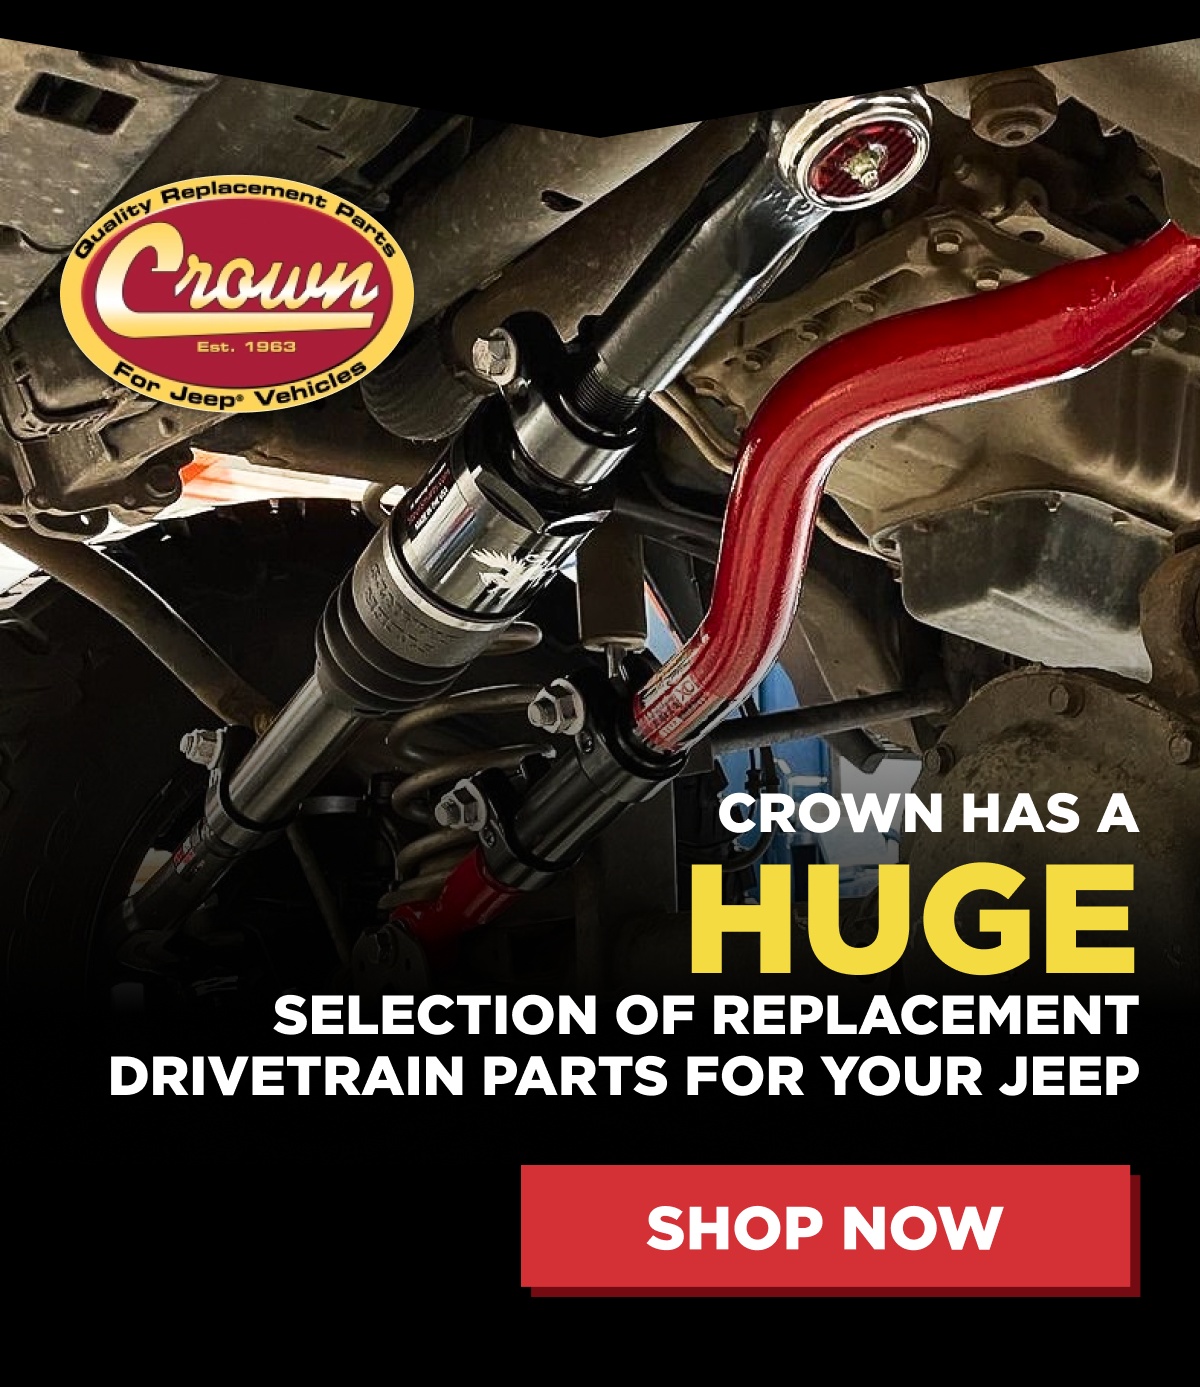 Crown Has A Huge Selection of Replacement Drivetrain Parts For Your Jeep